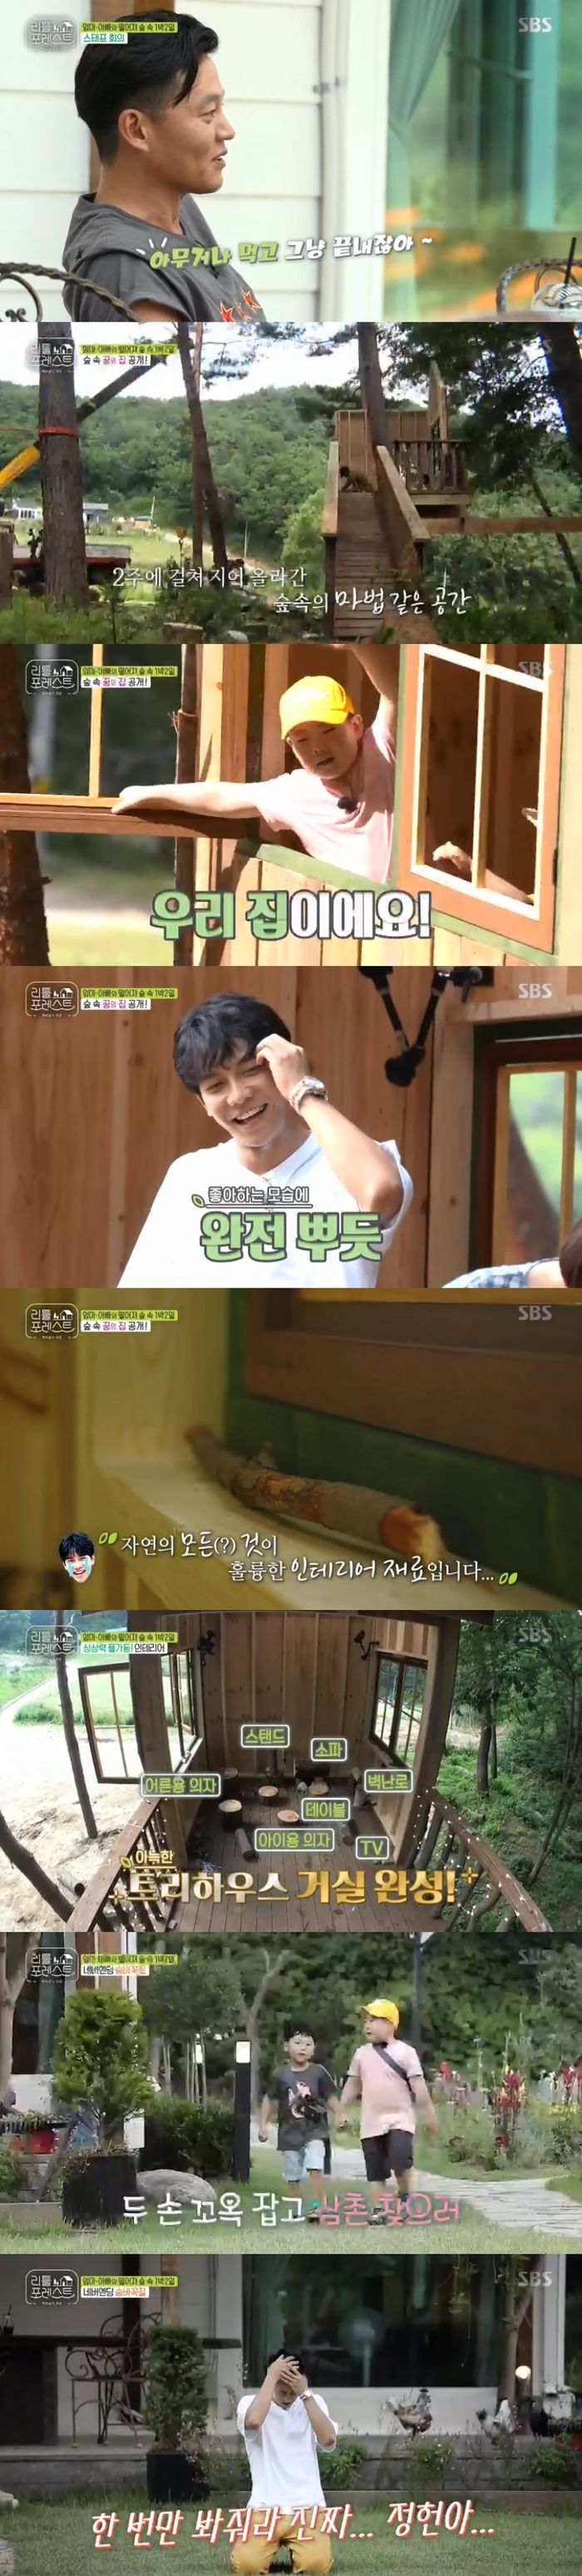 The tree house in Fairytale is complete.On SBS Little Forest broadcast on the night of the 26th, Lee Seung-gis own tree house for children was released.A new forest day began with the emergence of six-year-old Kim Jin-heen as a new Little Lee; members prepared lunch with seafood arancini for the children.Lee Seung-gi and Park Na-rae expressed their regrets for the Arancini that were tailored to the childrens tastes; Park Na-rae said, I burned the kukuki and ate the candle.I think there should be a separate adult rice. Lee Seo-jin then said, There is no time. Look at me. Just eat and finish eating children. Park Na-rae laughed, My brother did not cover up than I thought.The little boys, who had finished lunch, took the members hands and headed for the tree house, where the children cheered and delighted to see the built-up house.Lee Seung-gi, who saw it, could not hide his pride.At that time, Lee asked, Can not you decorate here now? The children went straight to the forest to find the material to decorate the tree house.Lee Seung-gi was anxious as she watched the children decorate the house, and said, I really think its really different for children to think.The children began to decorate the tree house with stones, branches, logs, etc. So the cozy tree house was completed with the ingredients they picked.Lee Seung-gi then fell into Hide and Seek hell.Kim Jin-heen, who likes Hide and Seek, started playing Hide and Seek with children at the request of the group.However, Lee Seung-gi eventually laughed at the end of the game, saying, Please look at it once, Kim Jin-heen.